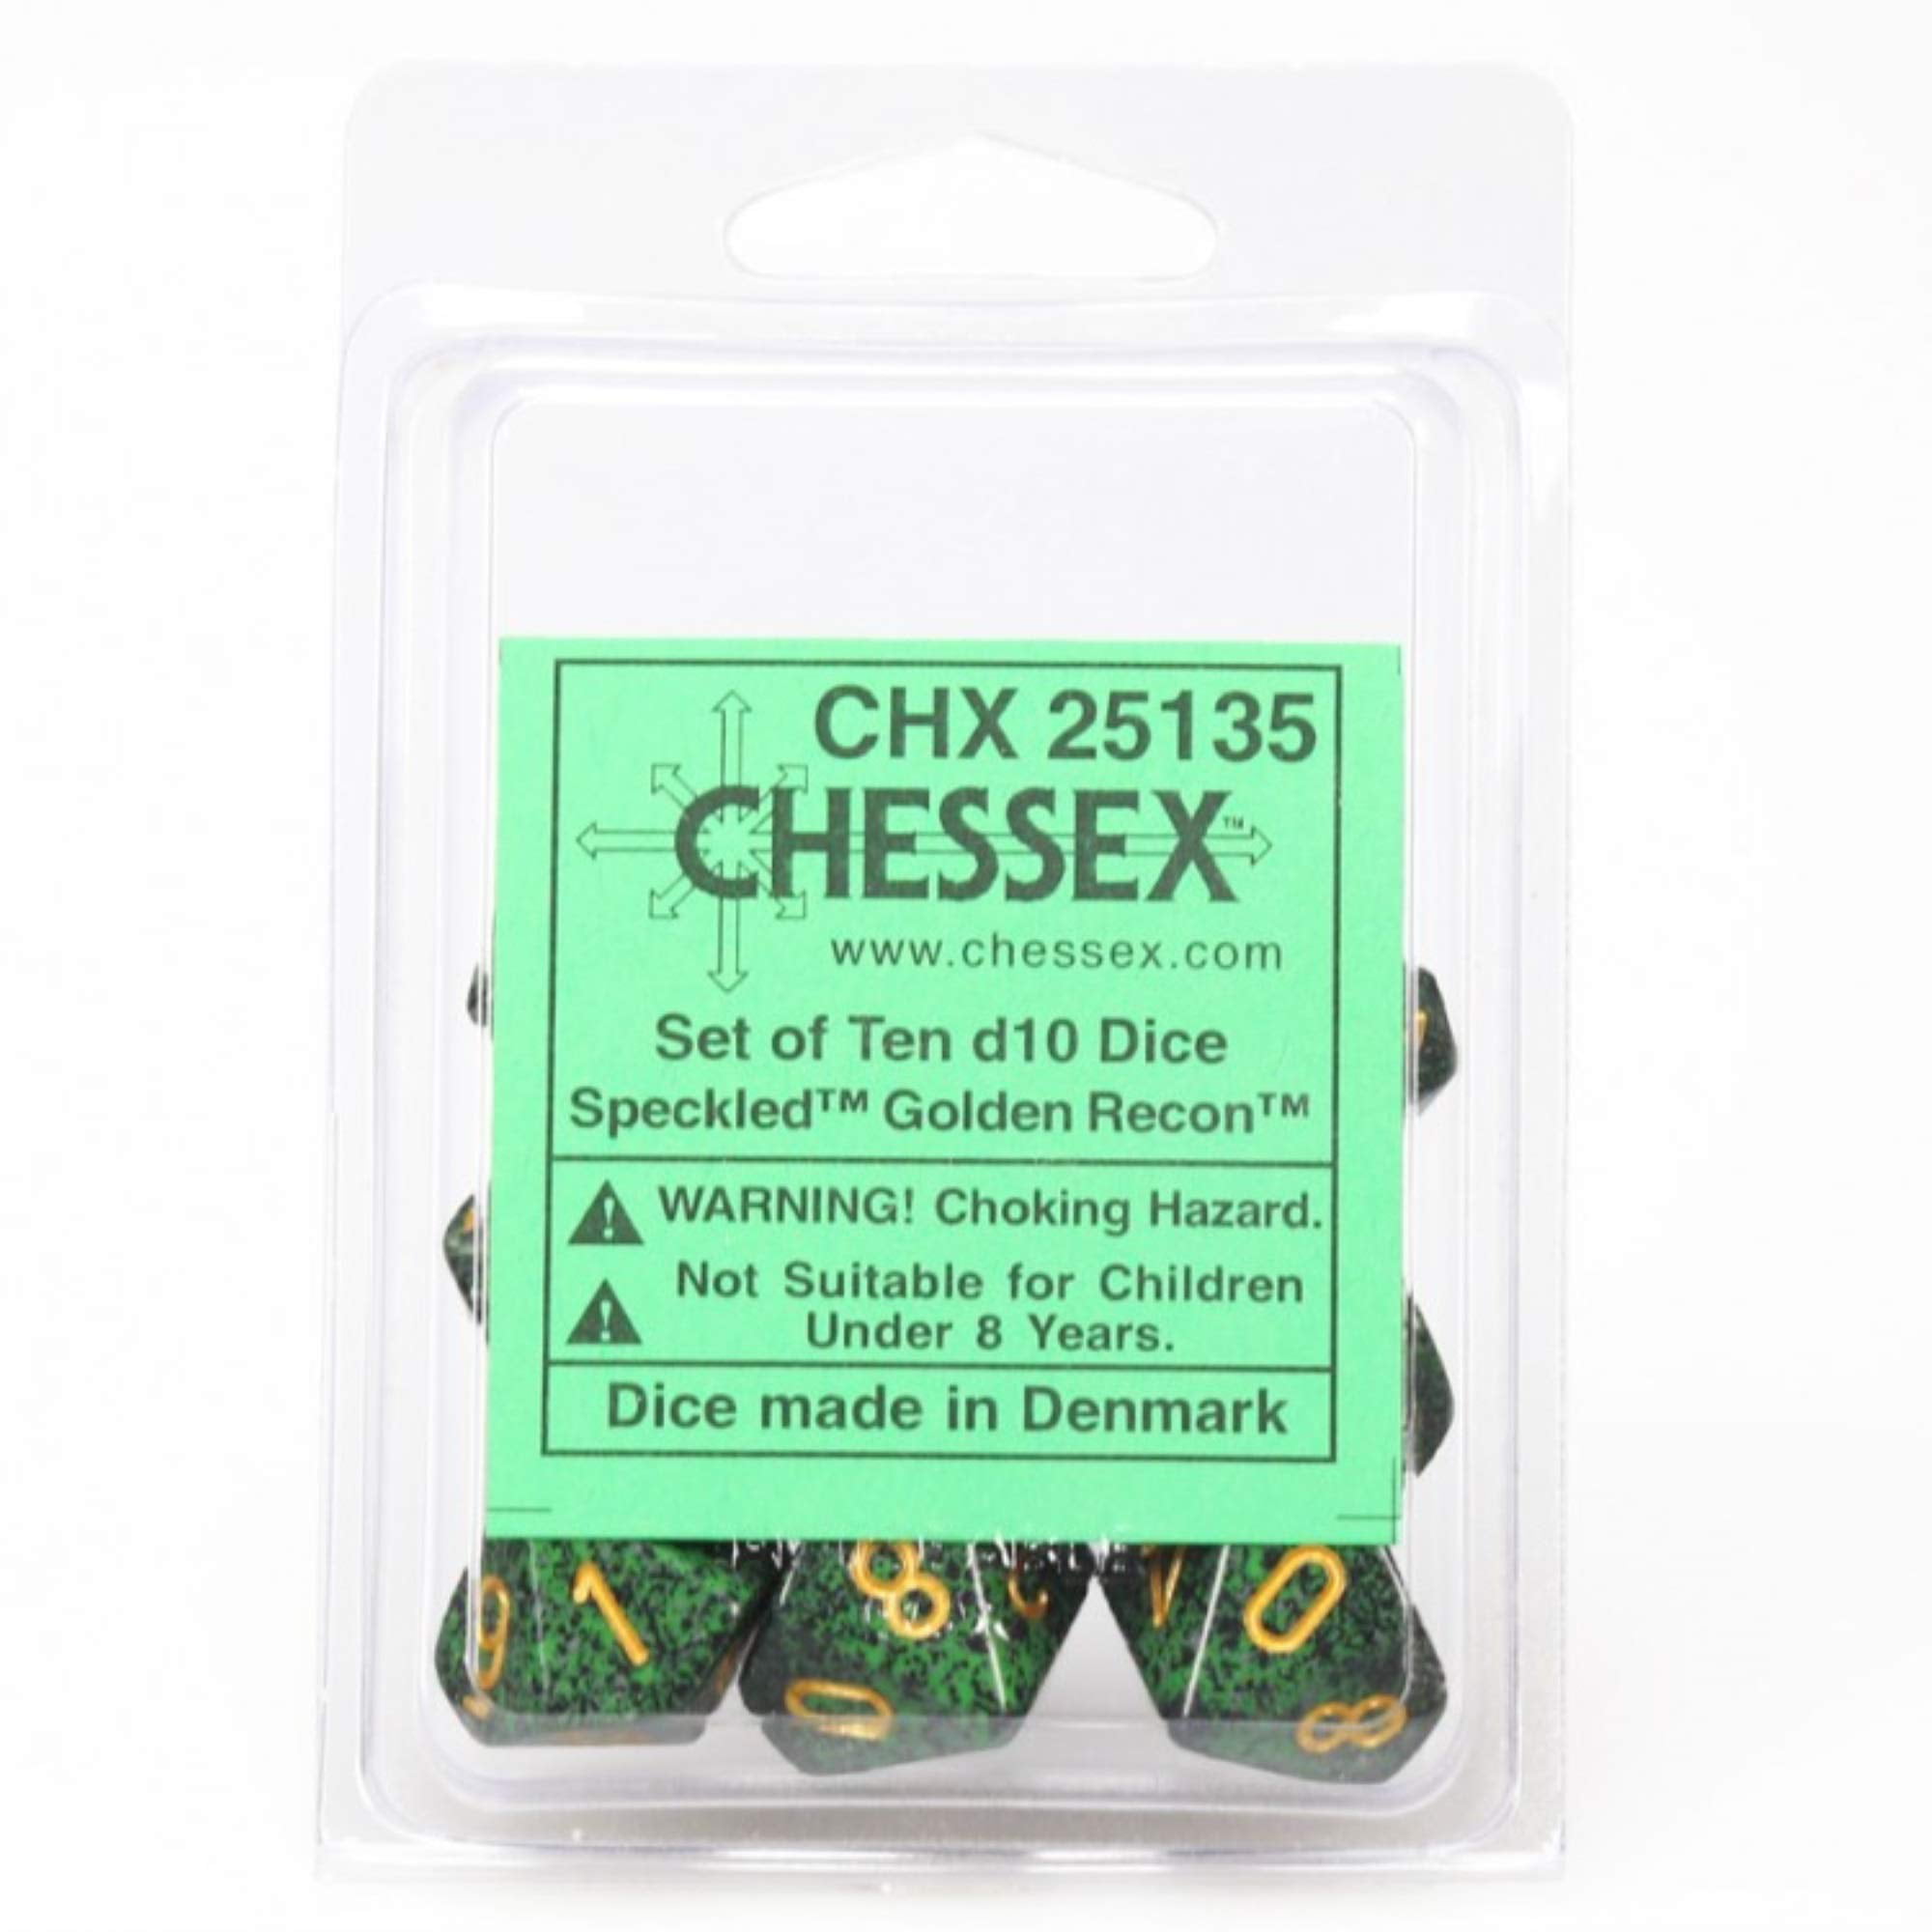 Ten Sided Die d10 Set CHX 25135 10 Chessex Dice Sets: Golden Recon Speckled 